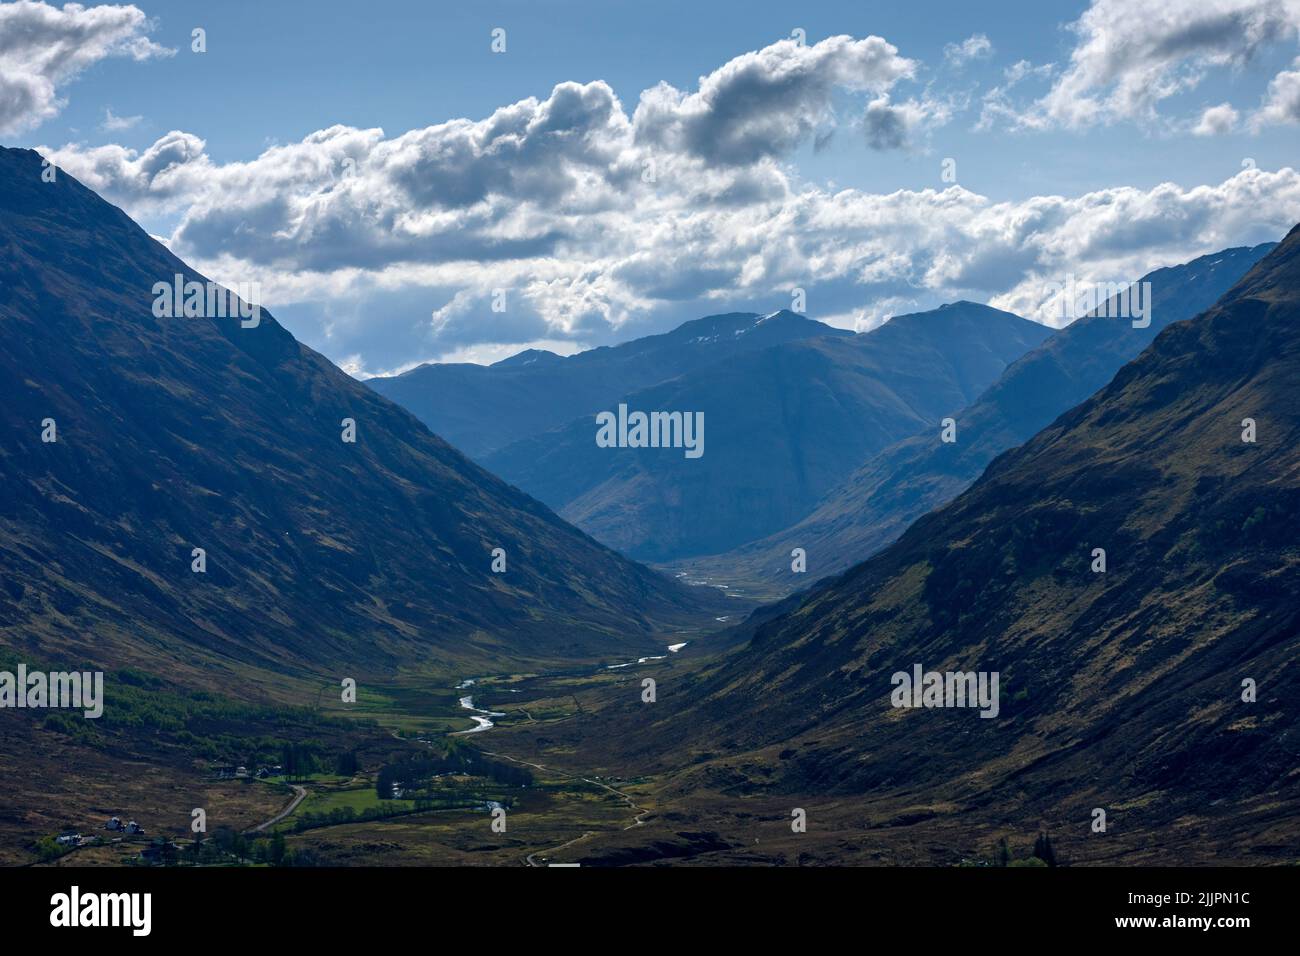 Gleann Lichd from the slopes of Sgurr an Airgid, Kintail, Highland Region, Scotland, UK Stock Photo